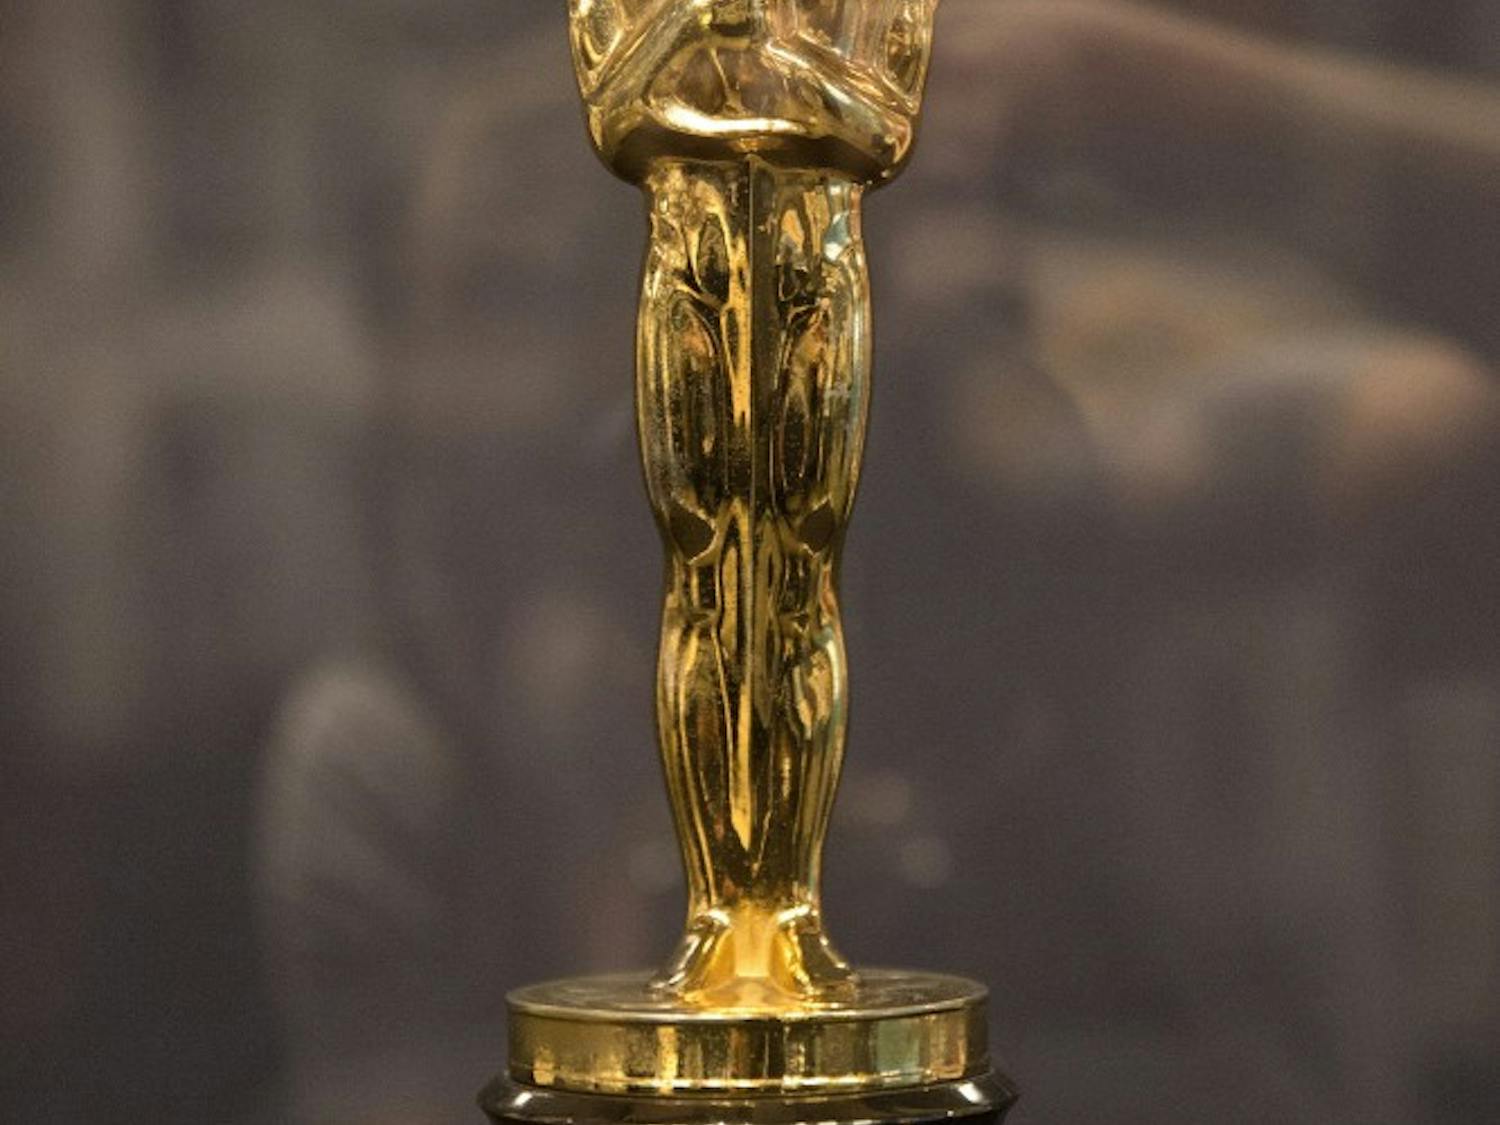 An Academy Award given to Charles Brackett, Billy Wilder and D.M. Marshman Jr. for "Best Writing, Story and Screenplay" for "Sunset Boulevard" is on display at the  "Light & Noir: Exiles and Emigres in Hollywood, 1933-1950" exhibit at the Illinois Holocaust Museum Tuesday, Oct. 6, 2015 in Skokie, Ill. (Erin Hooley/Chicago Tribune/TNS) 